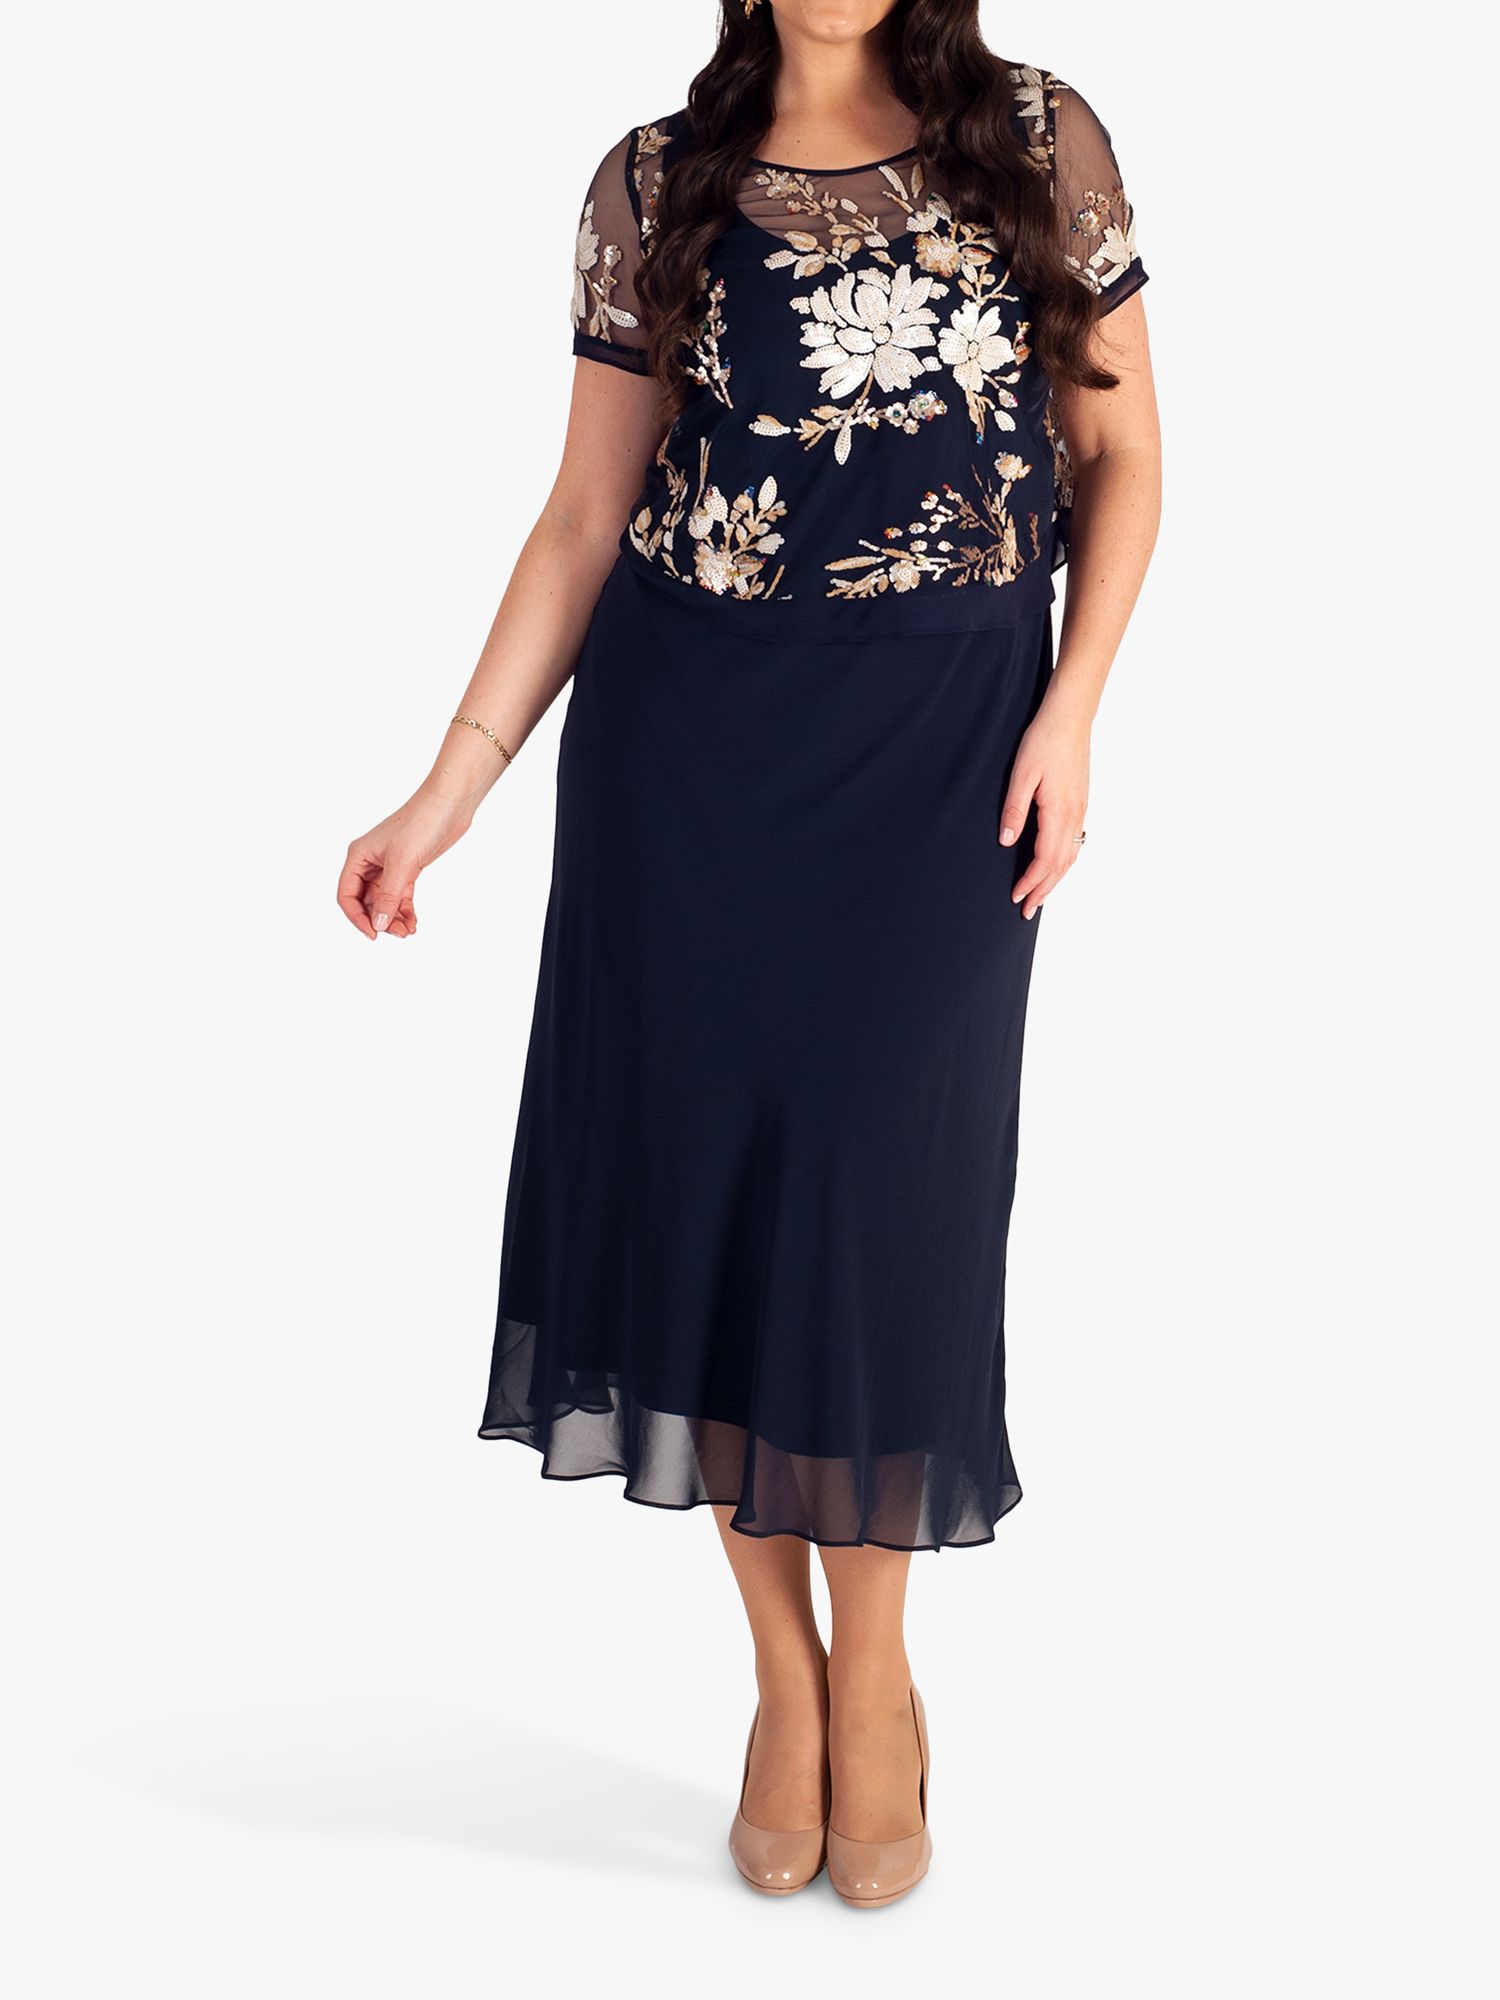 Chesca Embroidered Sequin Midi Dress, Navy